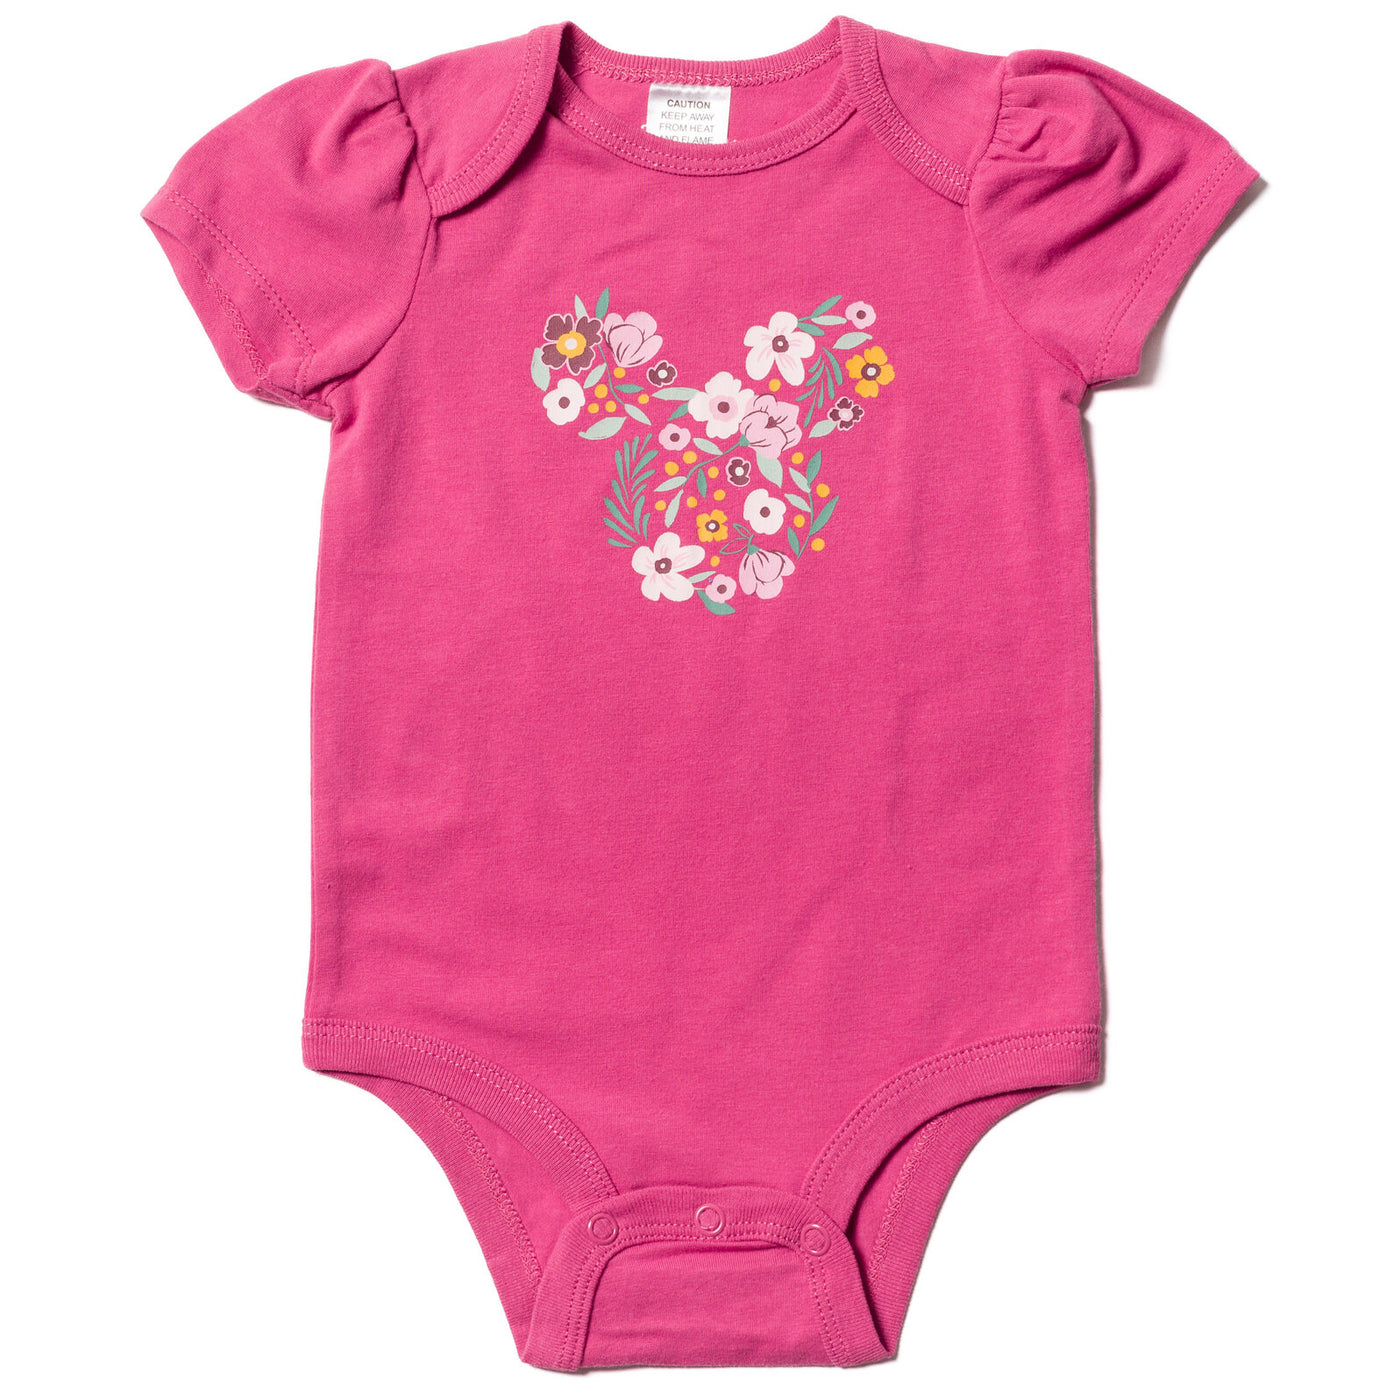 Minnie Mouse Mickey Cuddly Short Sleeve Bodysuits & Pants